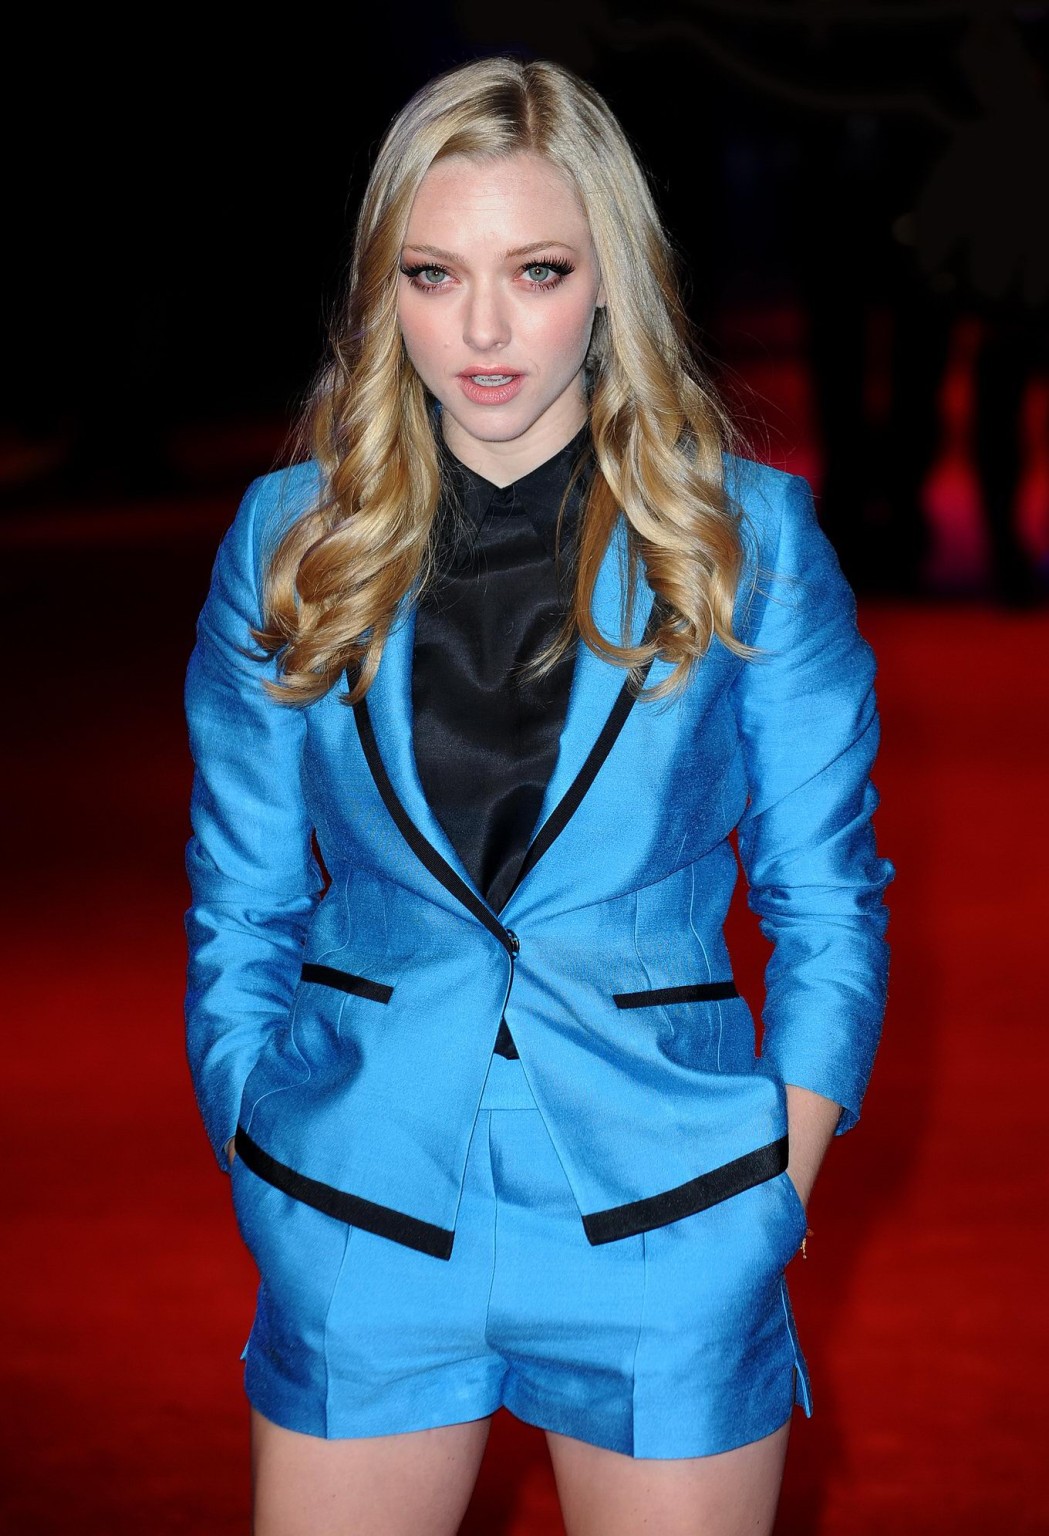 Amanda Seyfried leggy wearing shorts at the 'In Time' UK premiere in London #75284308